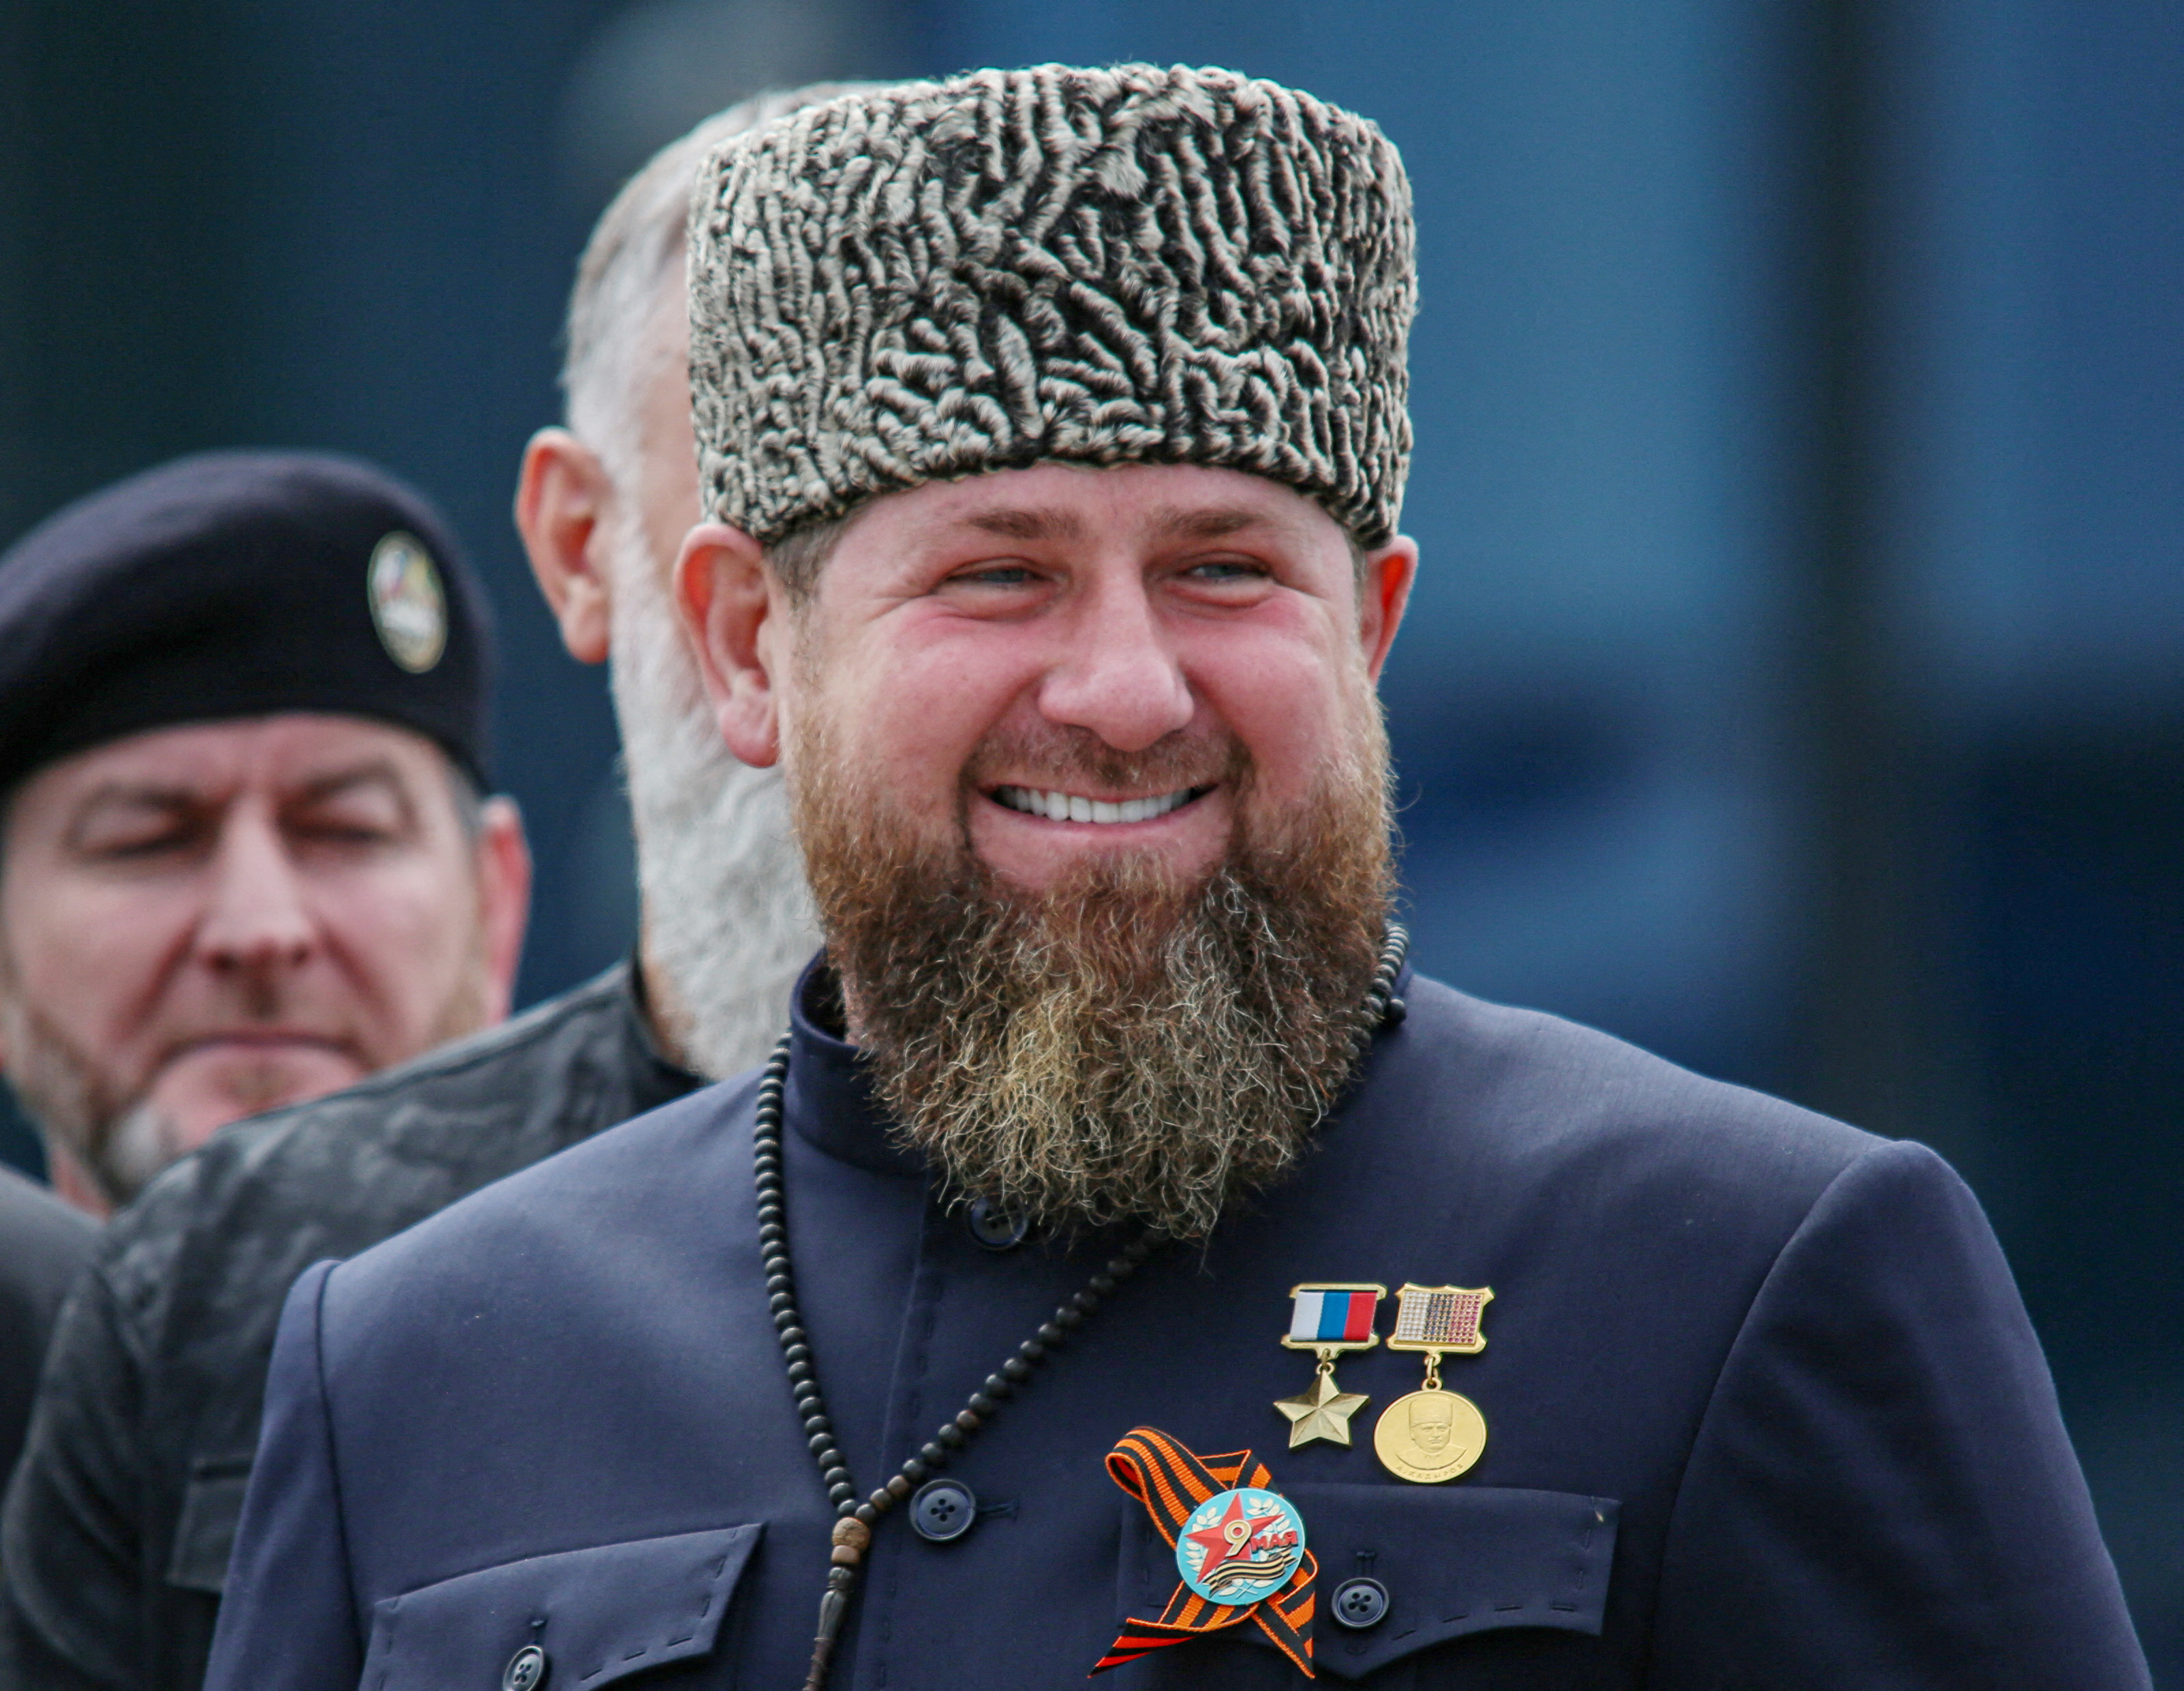 Russia Claims It Has No Details to Disclose With regards to Wellness Speculations Surrounding Ramzan Kadyrov | News on Russia-Ukraine Conflict